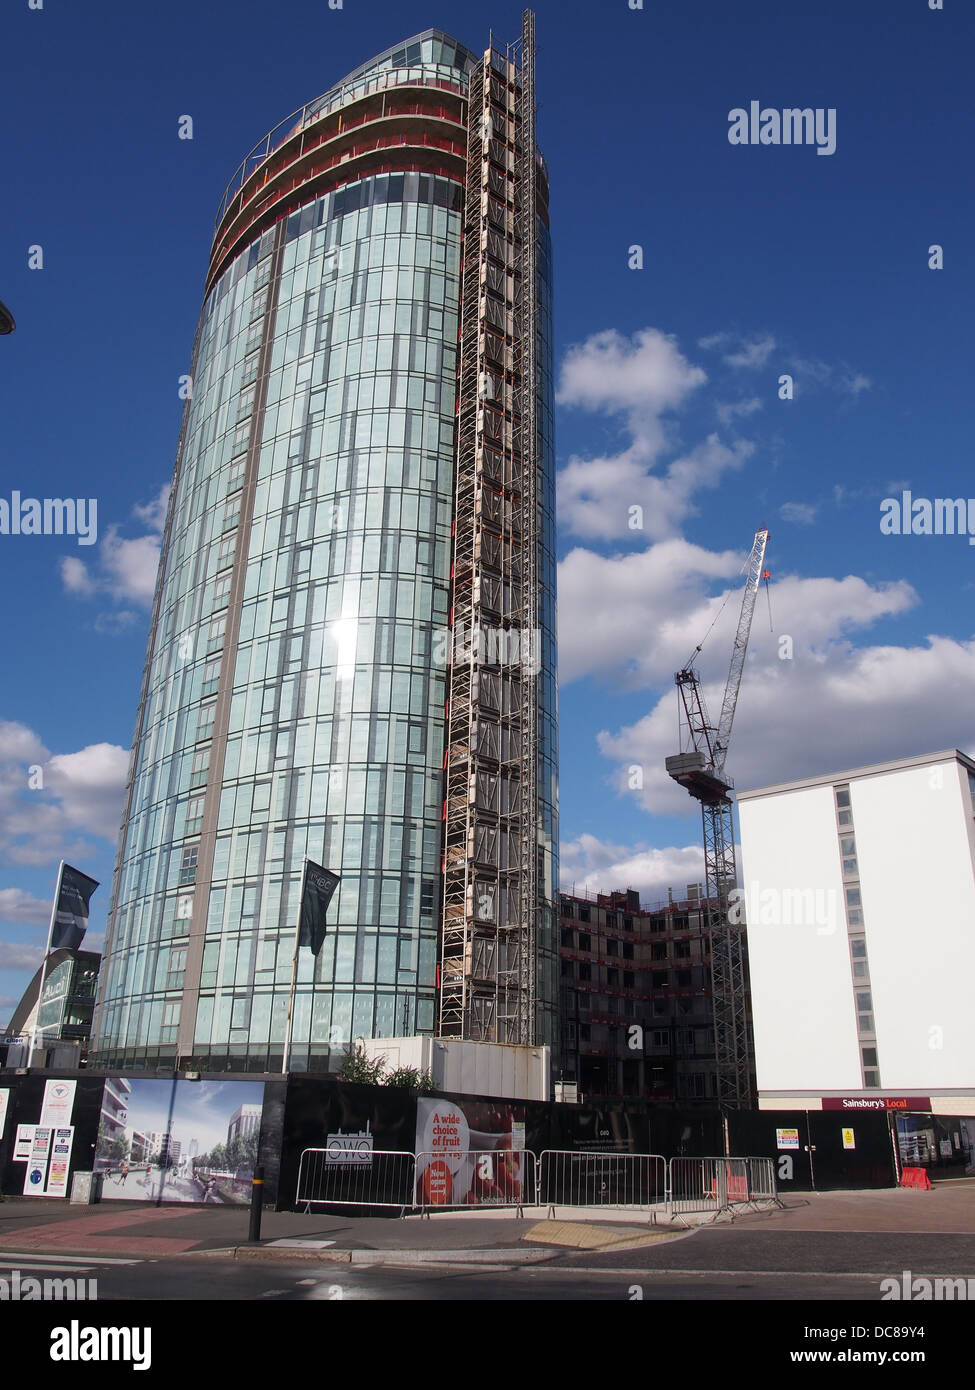 The Tower under construction in Brentfords Great West Quarter Stock Photo